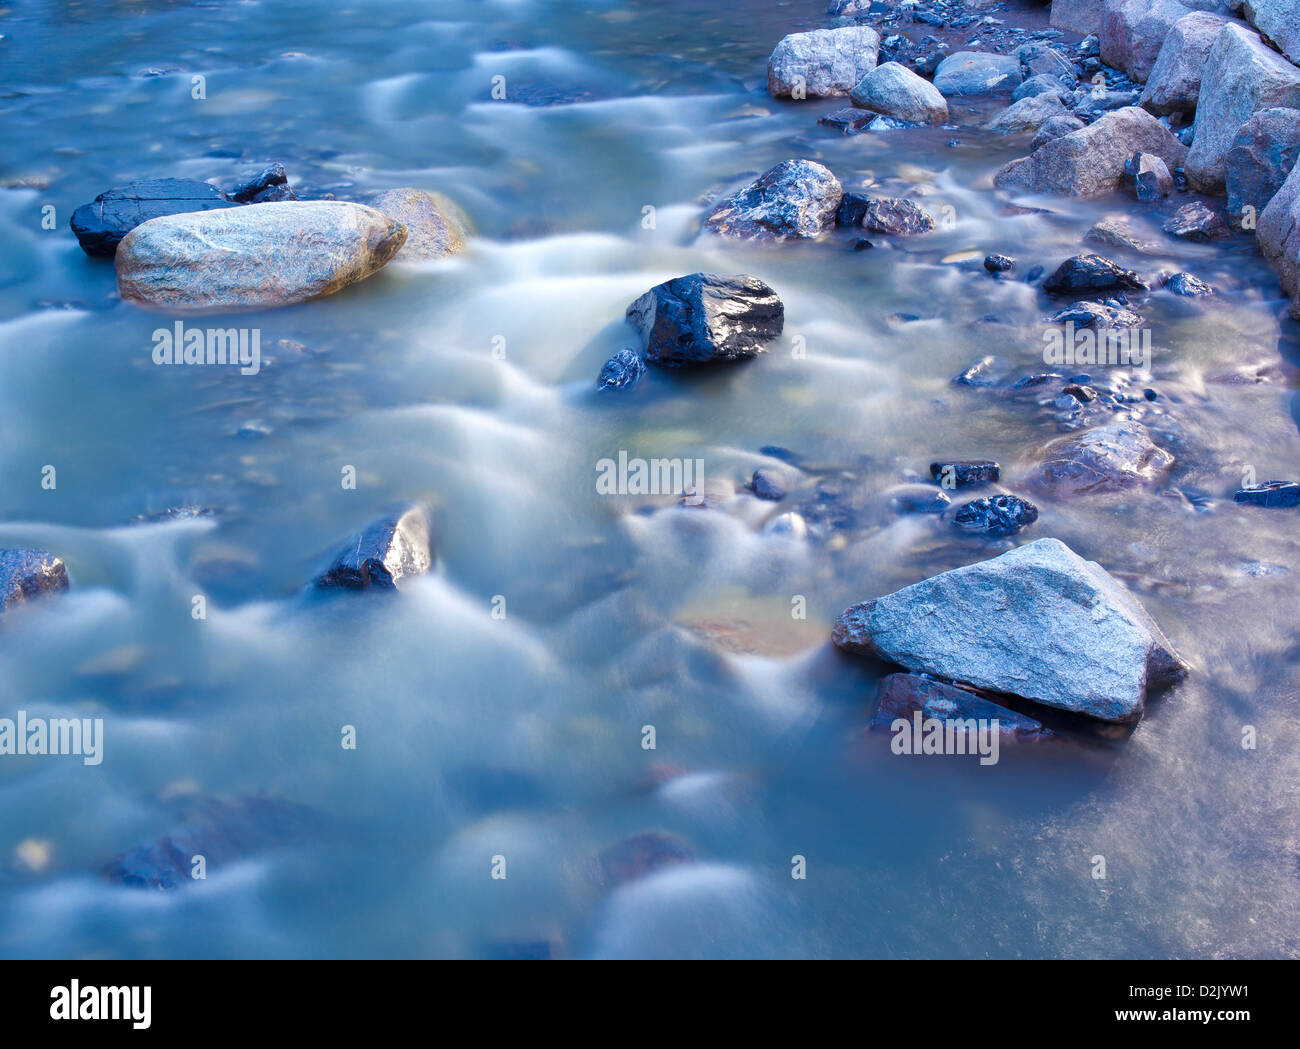 Stones in water. Effect of soft water. Stock Photo